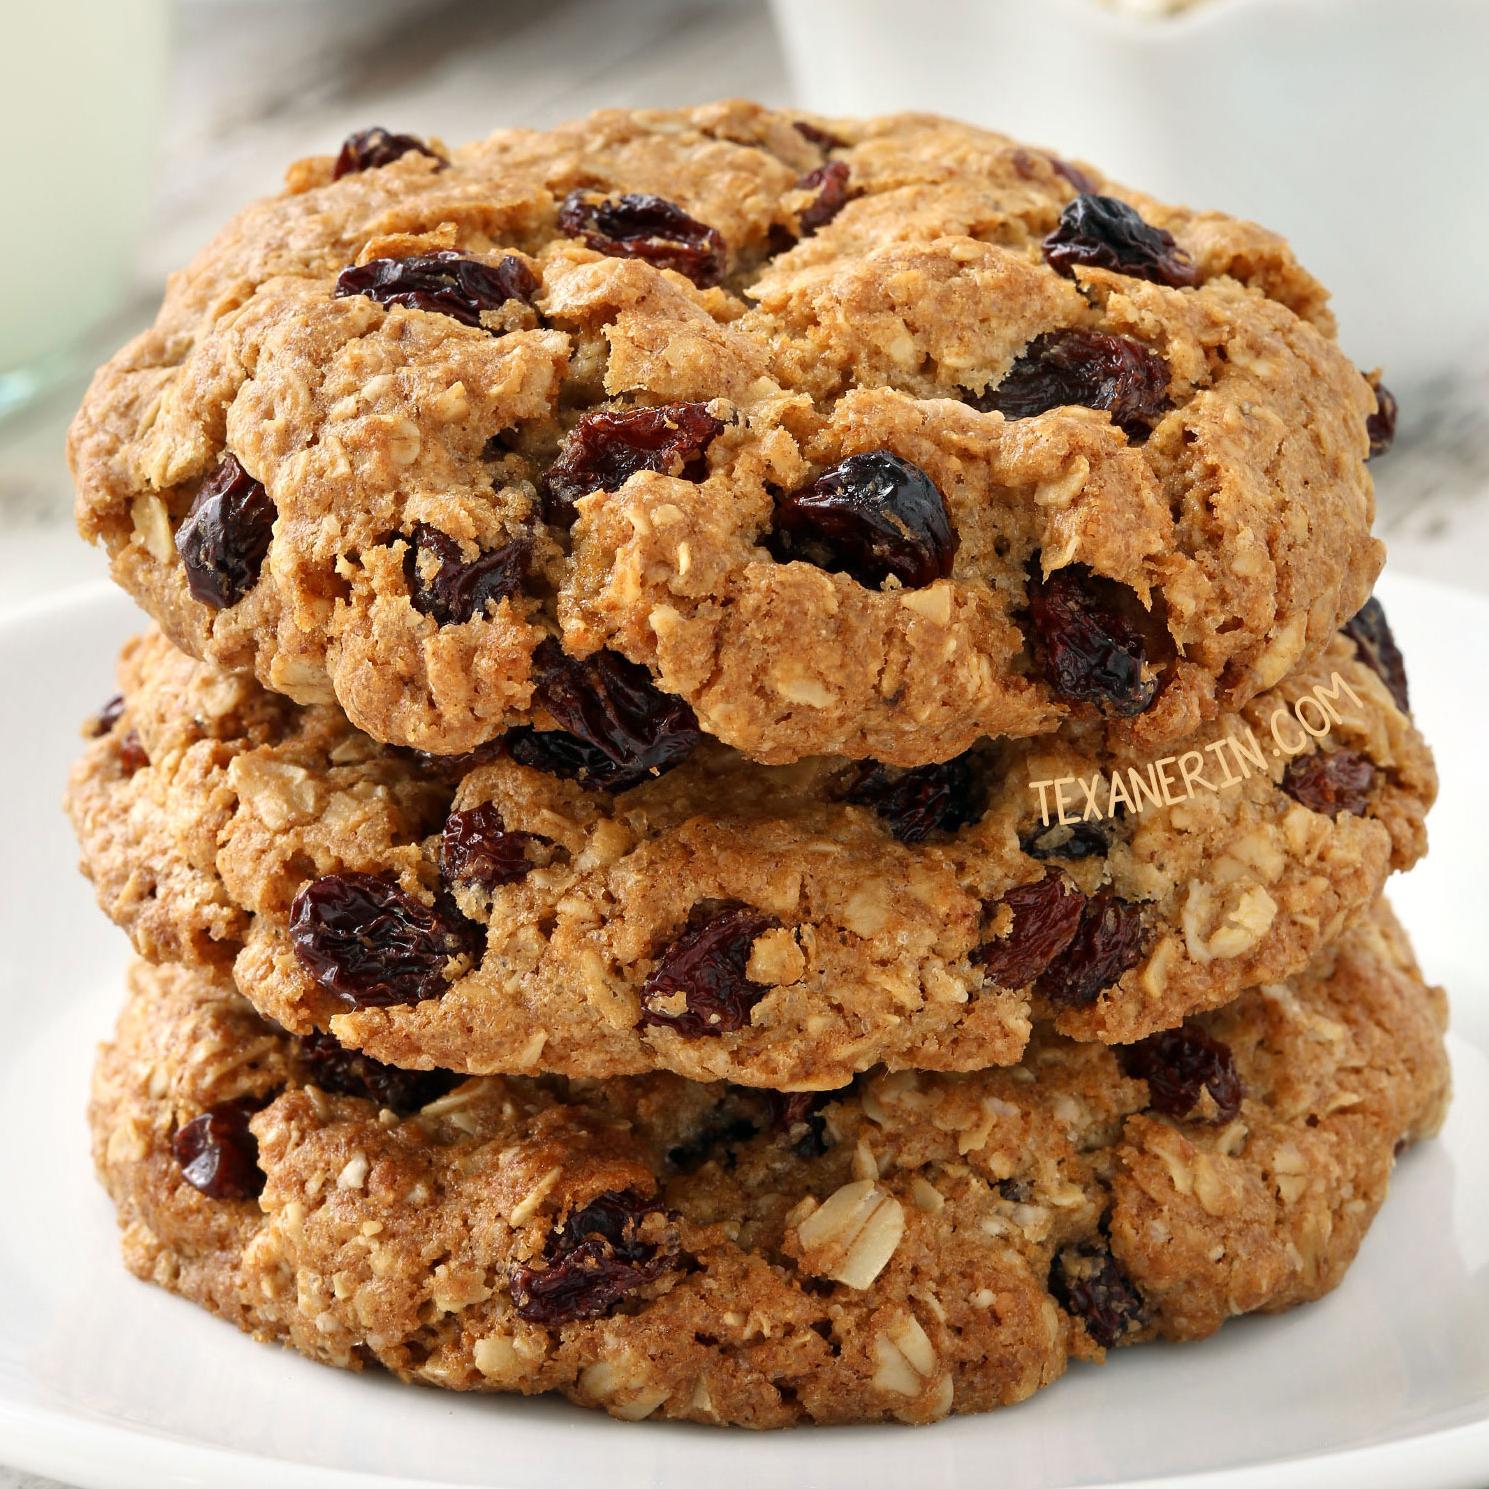  These coconut raisin cookies are gluten-free and dairy-free.